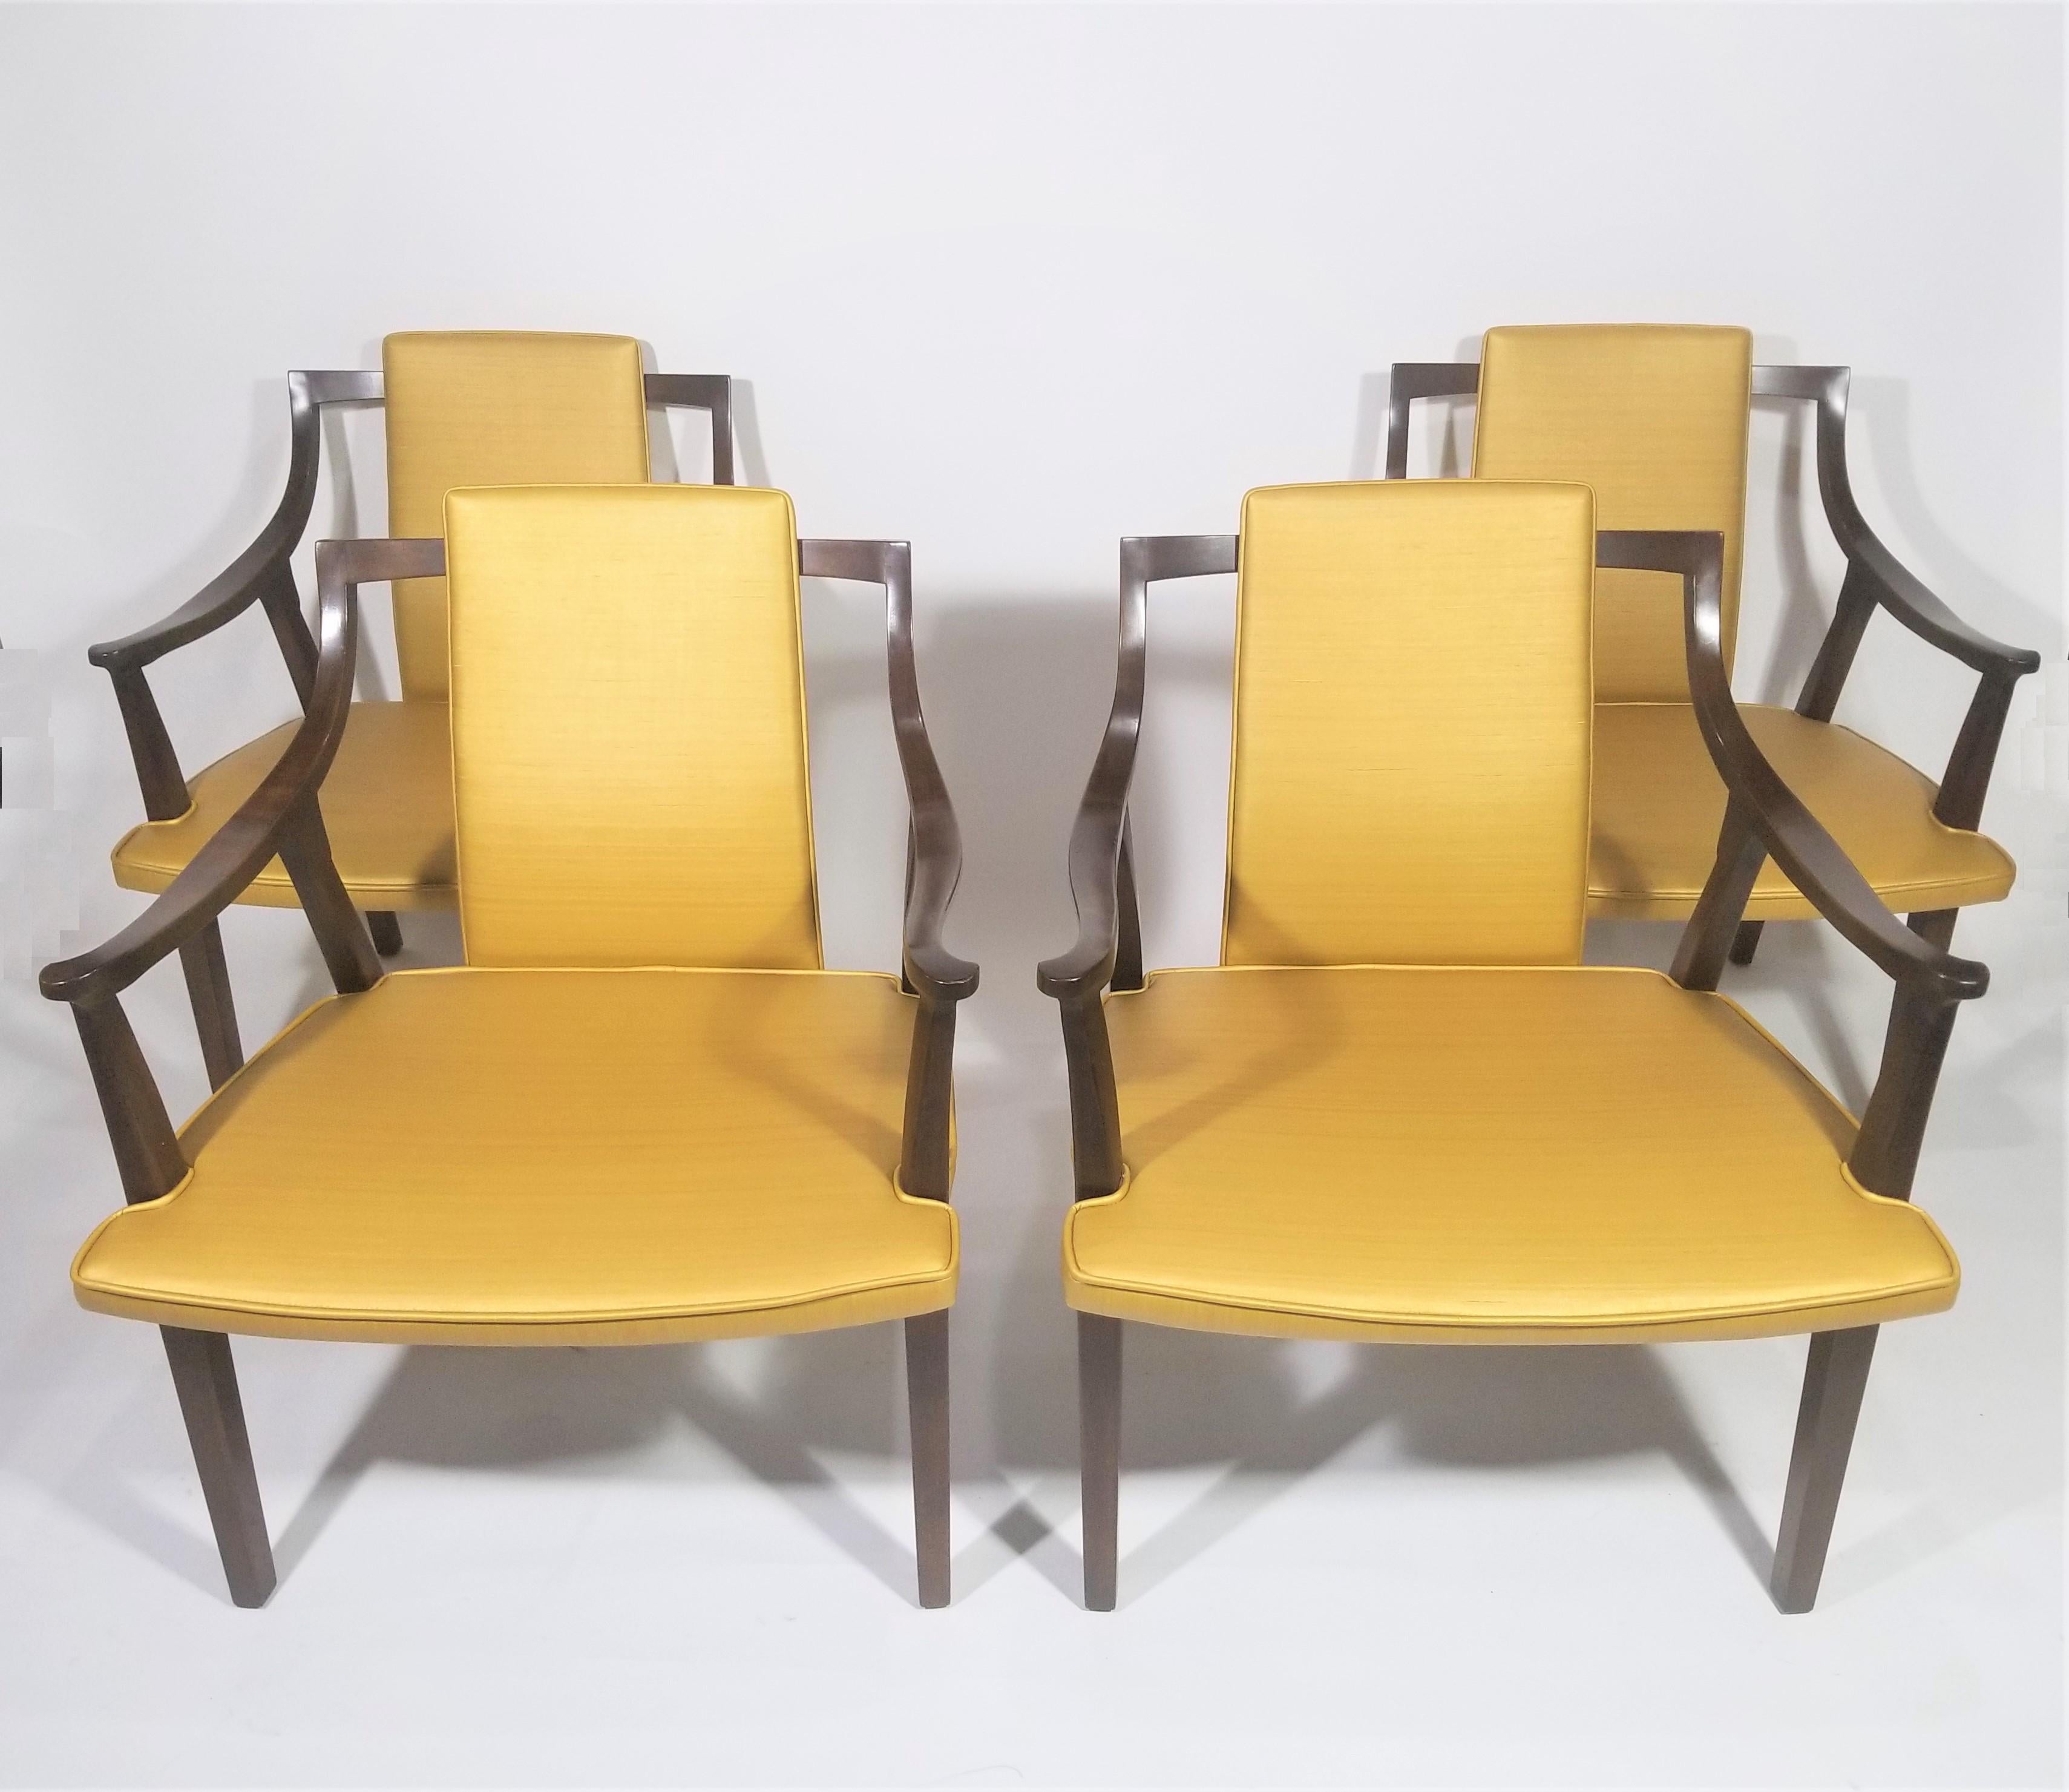 Mid Century 1960s 1970s John Widdicomb Chairs. Known for a history of high quality furniture. Chic design with elegant open arm wood frames and original upholstered seats and backrests. Excellent Condition exhibiting only minimal minor signs of